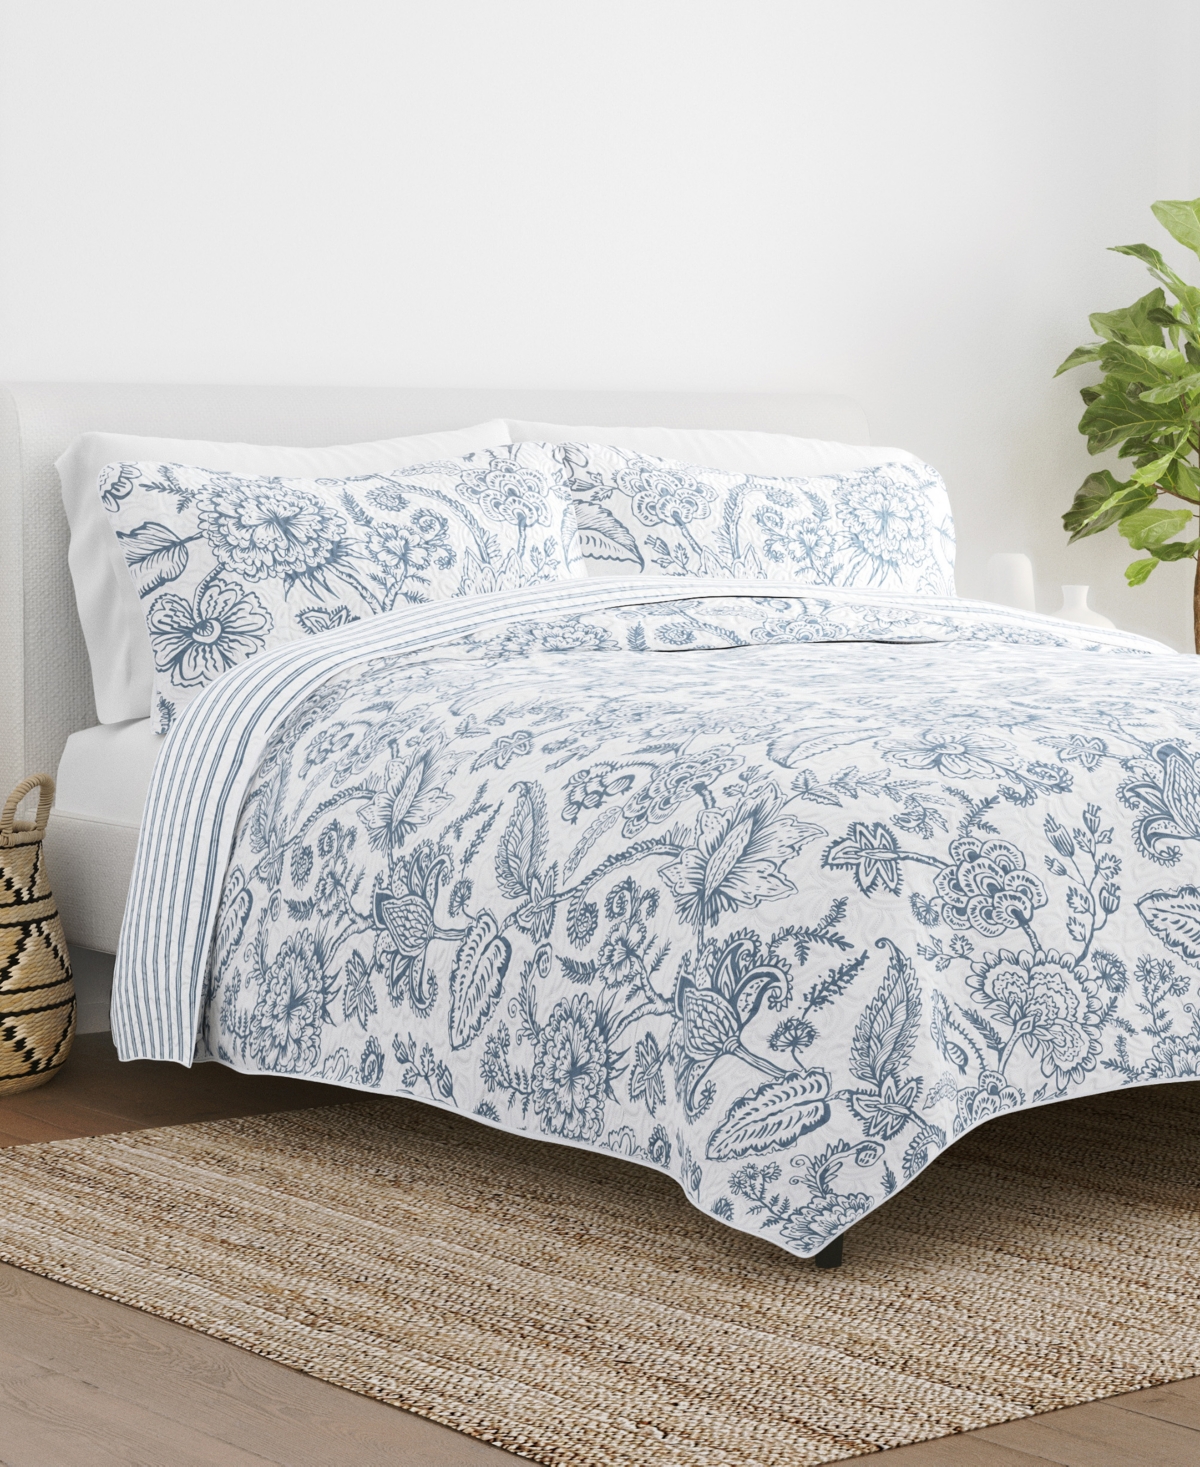 Ienjoy Home All Season 3 Piece Jacobean And Stripe Reversible Quilt Set, Full/queen In Dusk Blue